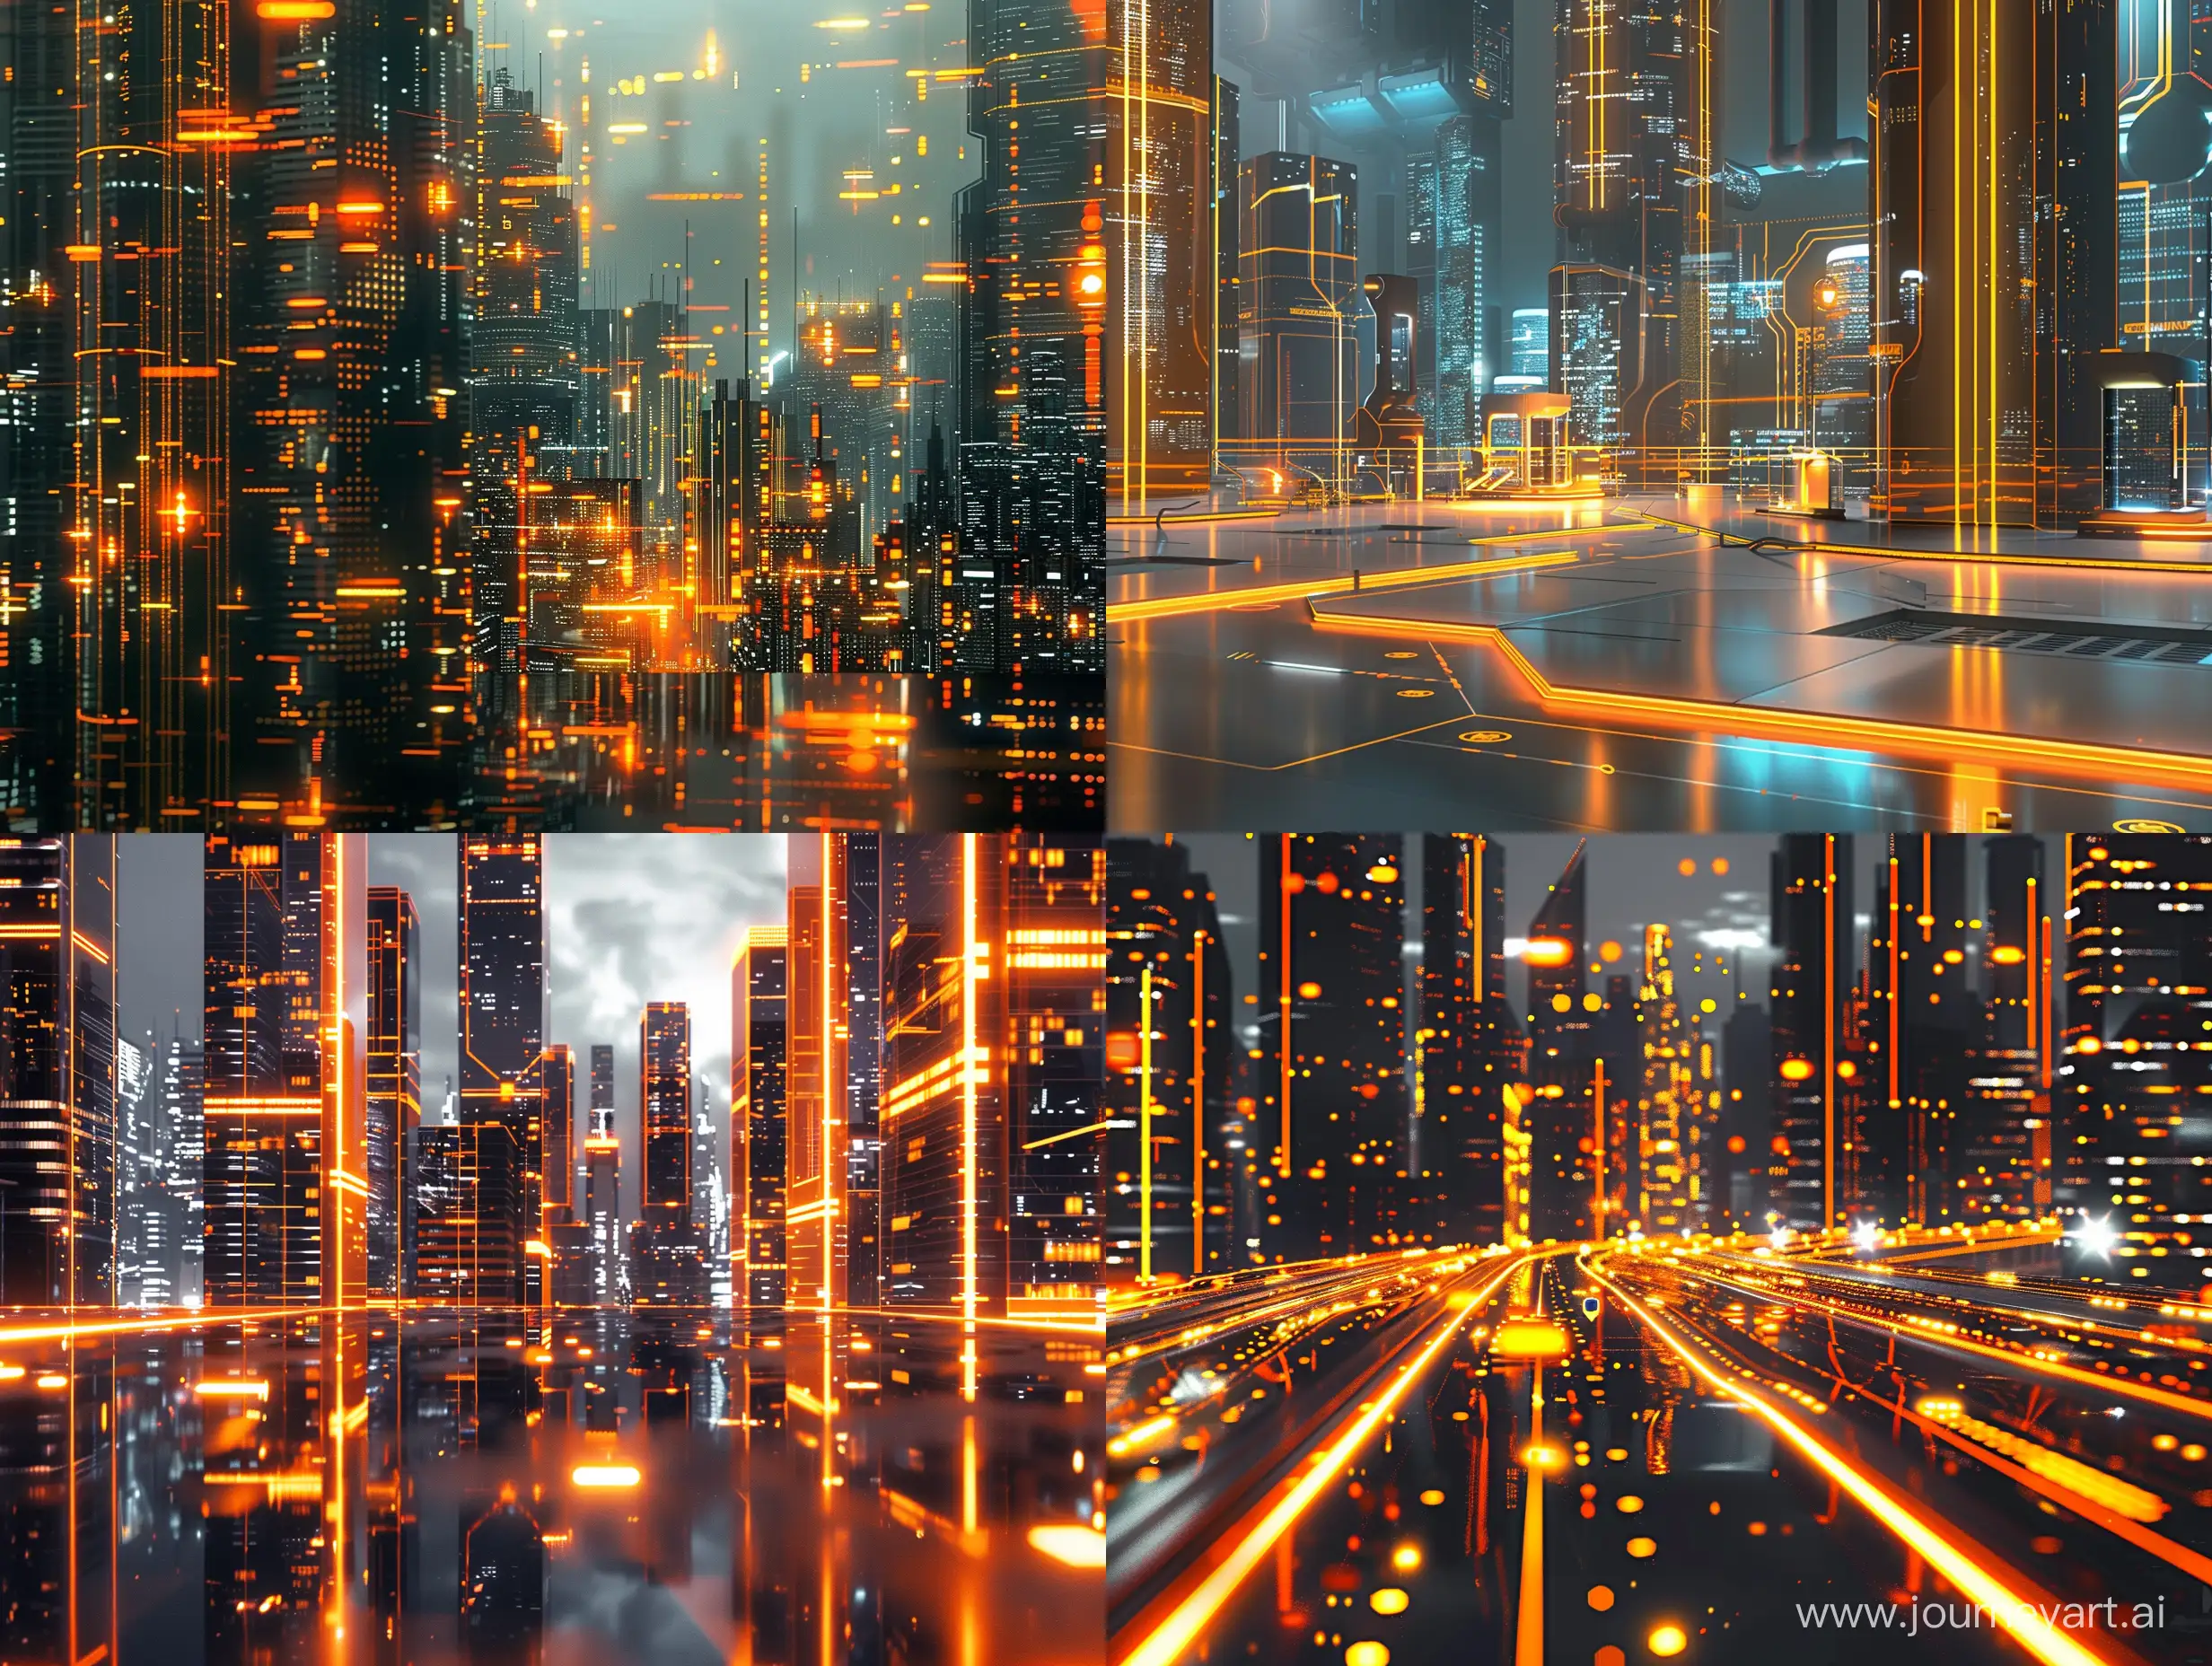 a clean futuristic sci-fi city nighttime setting, very modern and neat, something that doesn't disturb the eye with too much stuff, cyberpunk style but with the orange and gold glowing color theme 